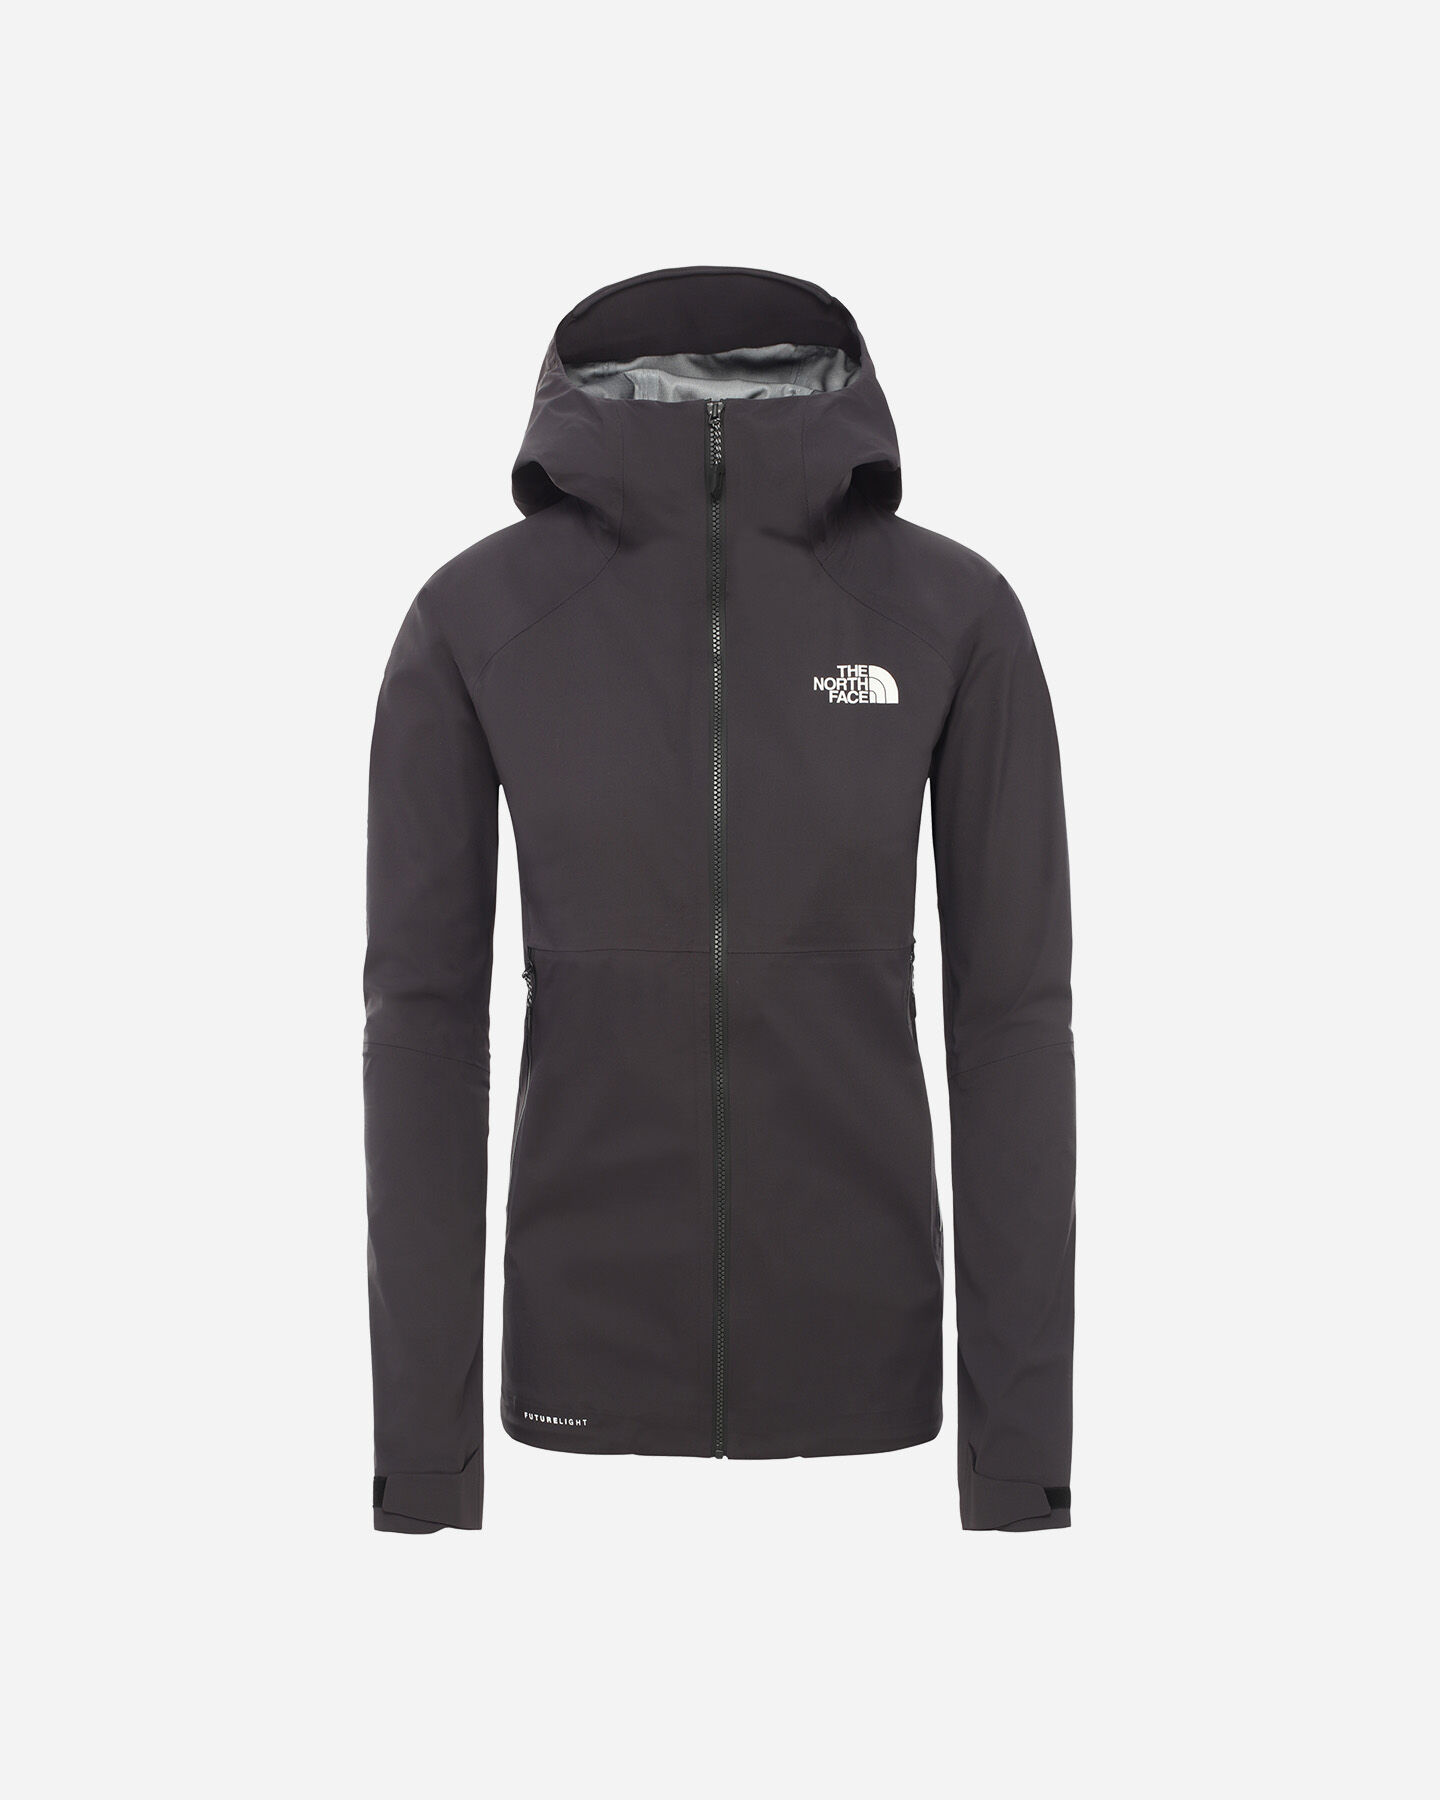  Giacca outdoor THE NORTH FACE IMPENDOR FL W S5192911|JK3|XS scatto 0